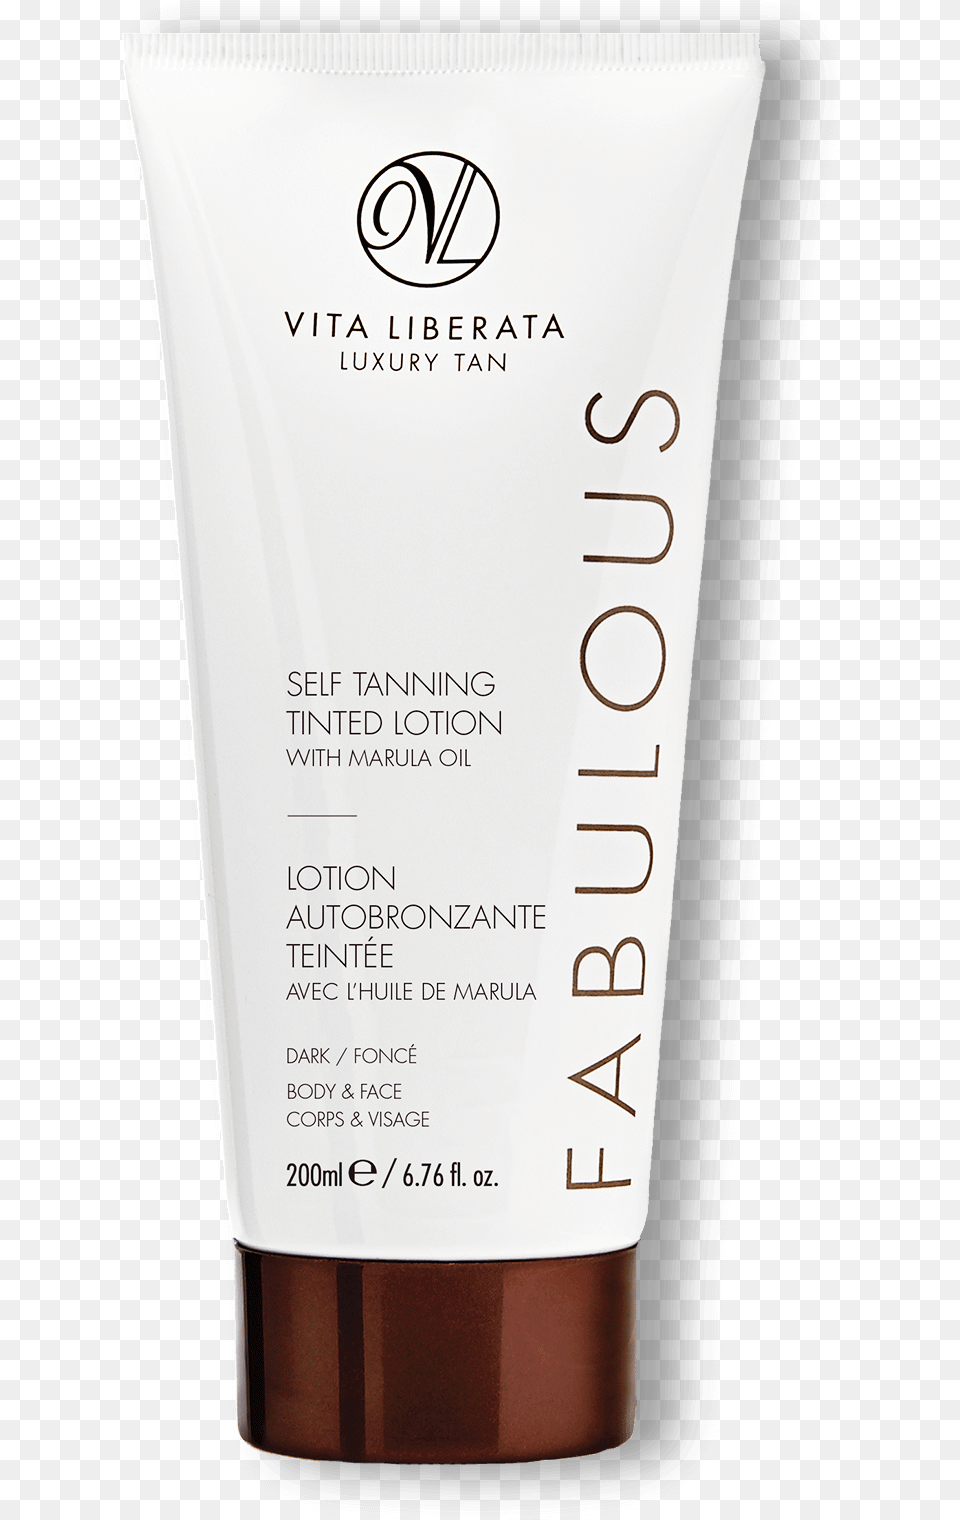 Lotion Autobronzante Teinte Fabulous Fonce Cosmetics, Bottle, Aftershave, Sunscreen Free Png Download